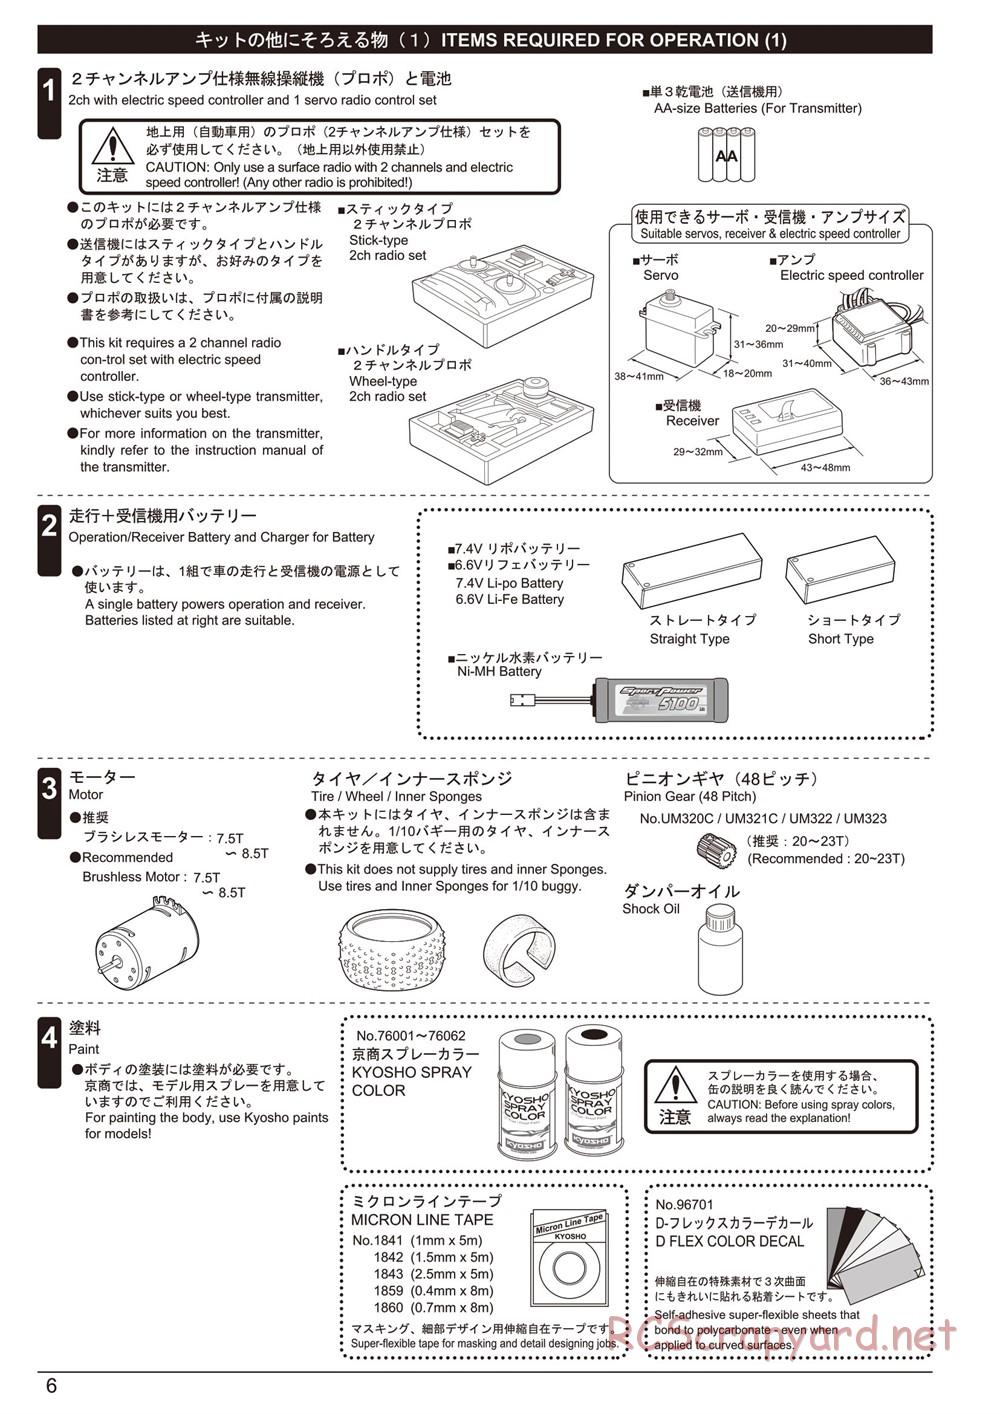 Kyosho - Ultima RB6.6 - Manual - Page 6